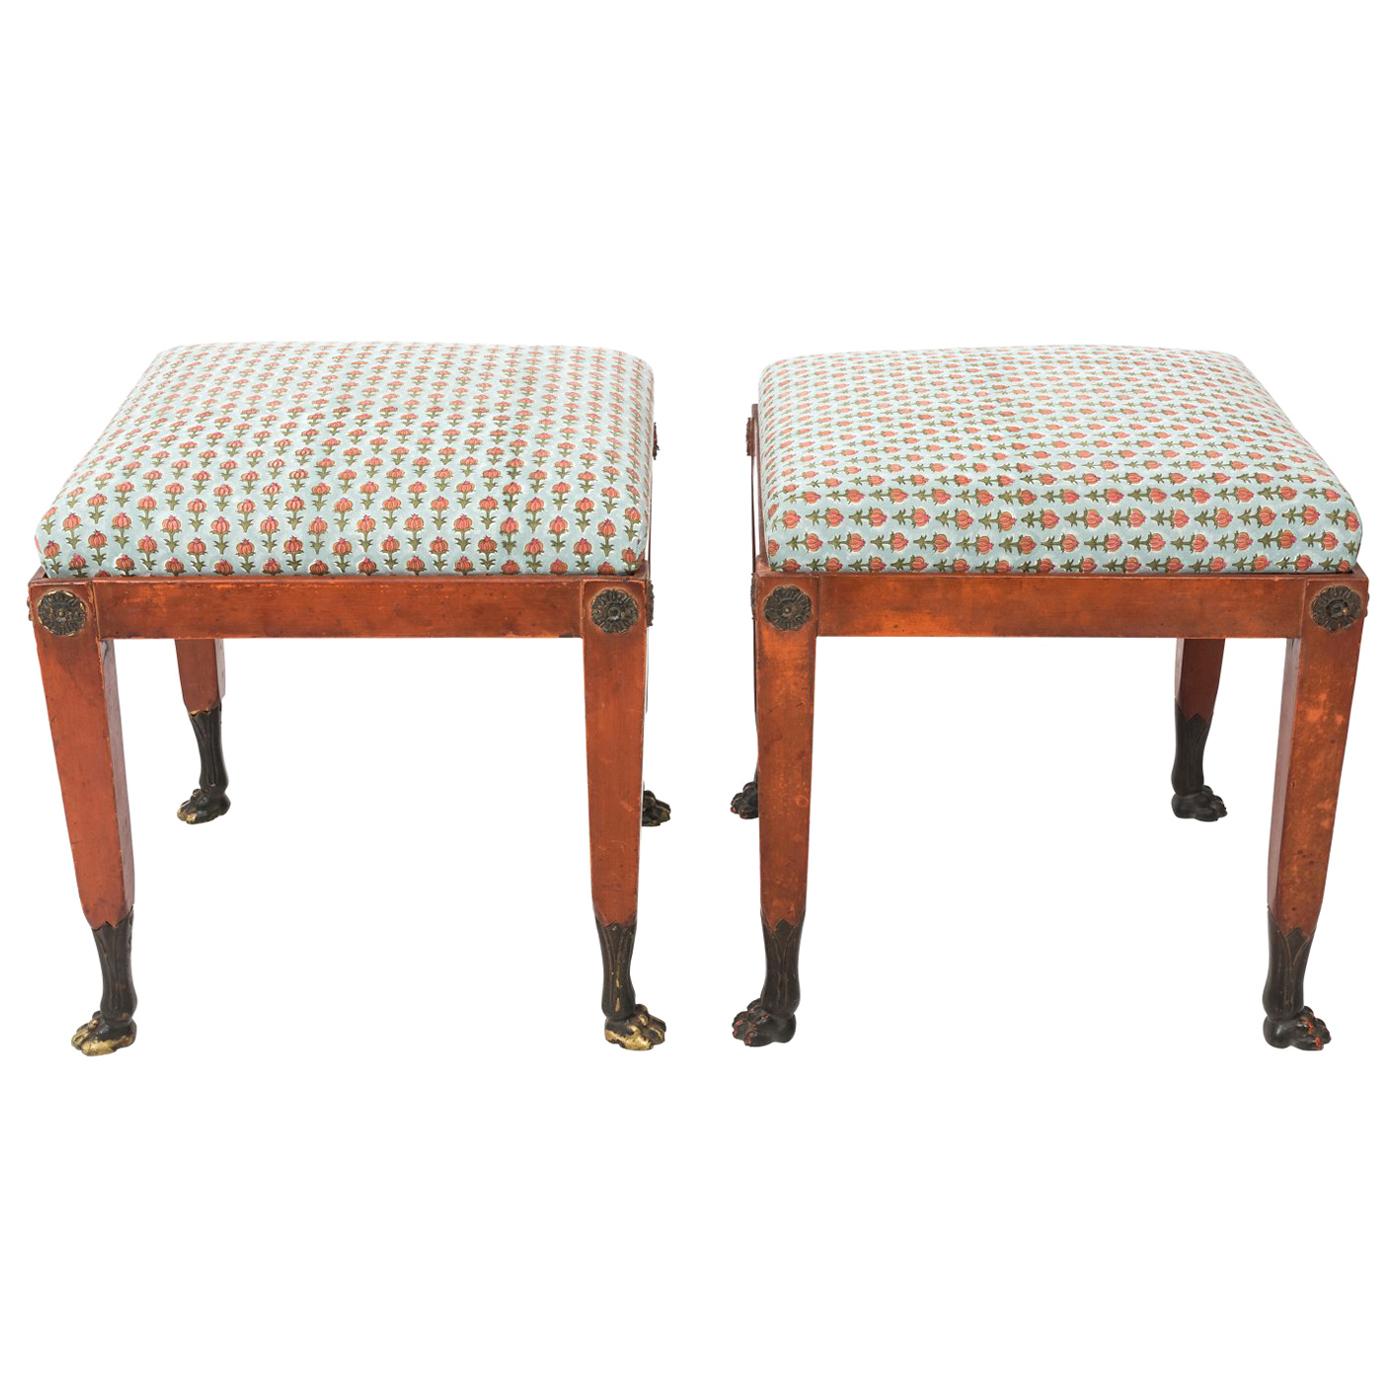 Pair of Lion's Paw Feet Benches